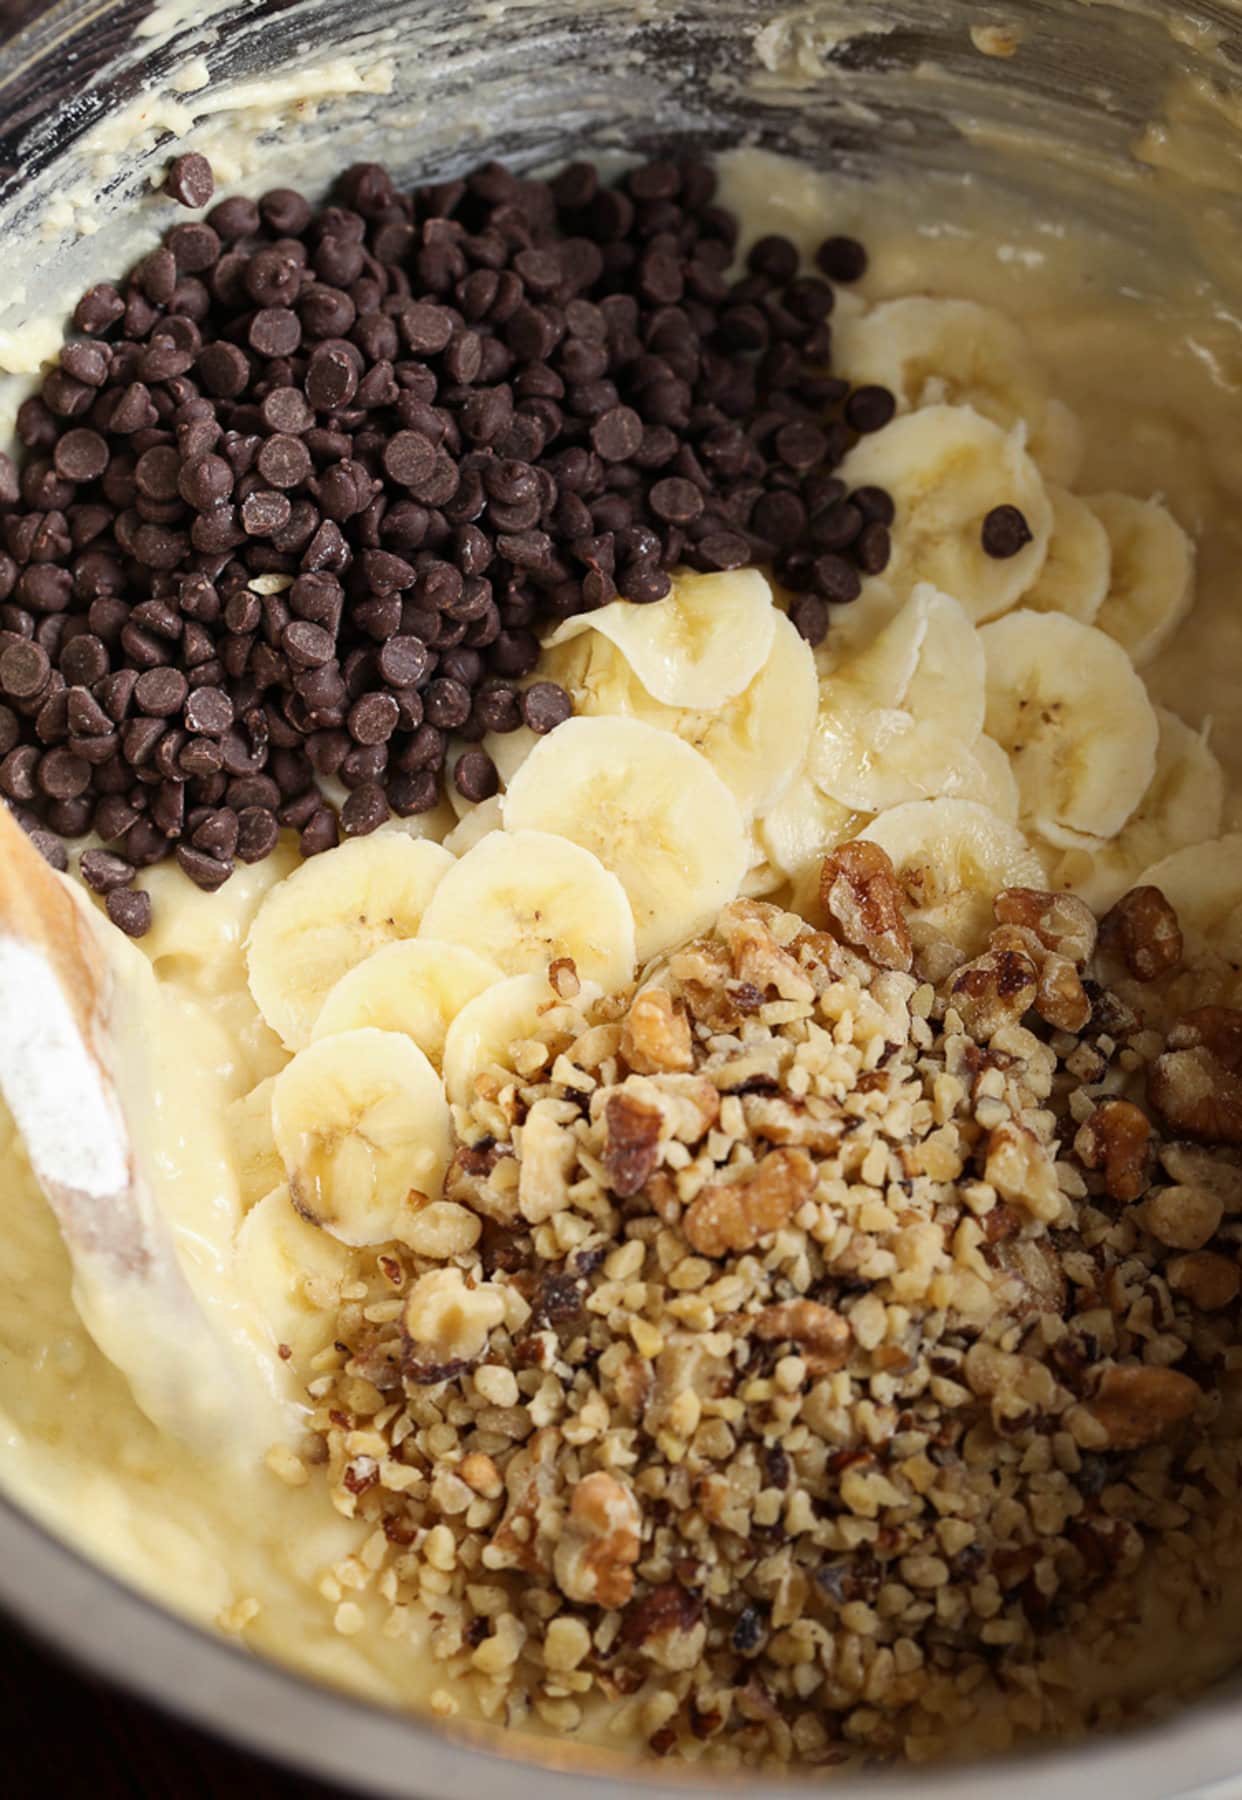 Banana bread batter in a mixing bowl with chocolate chips, chopped walnuts, and sliced bananas to be folded in.